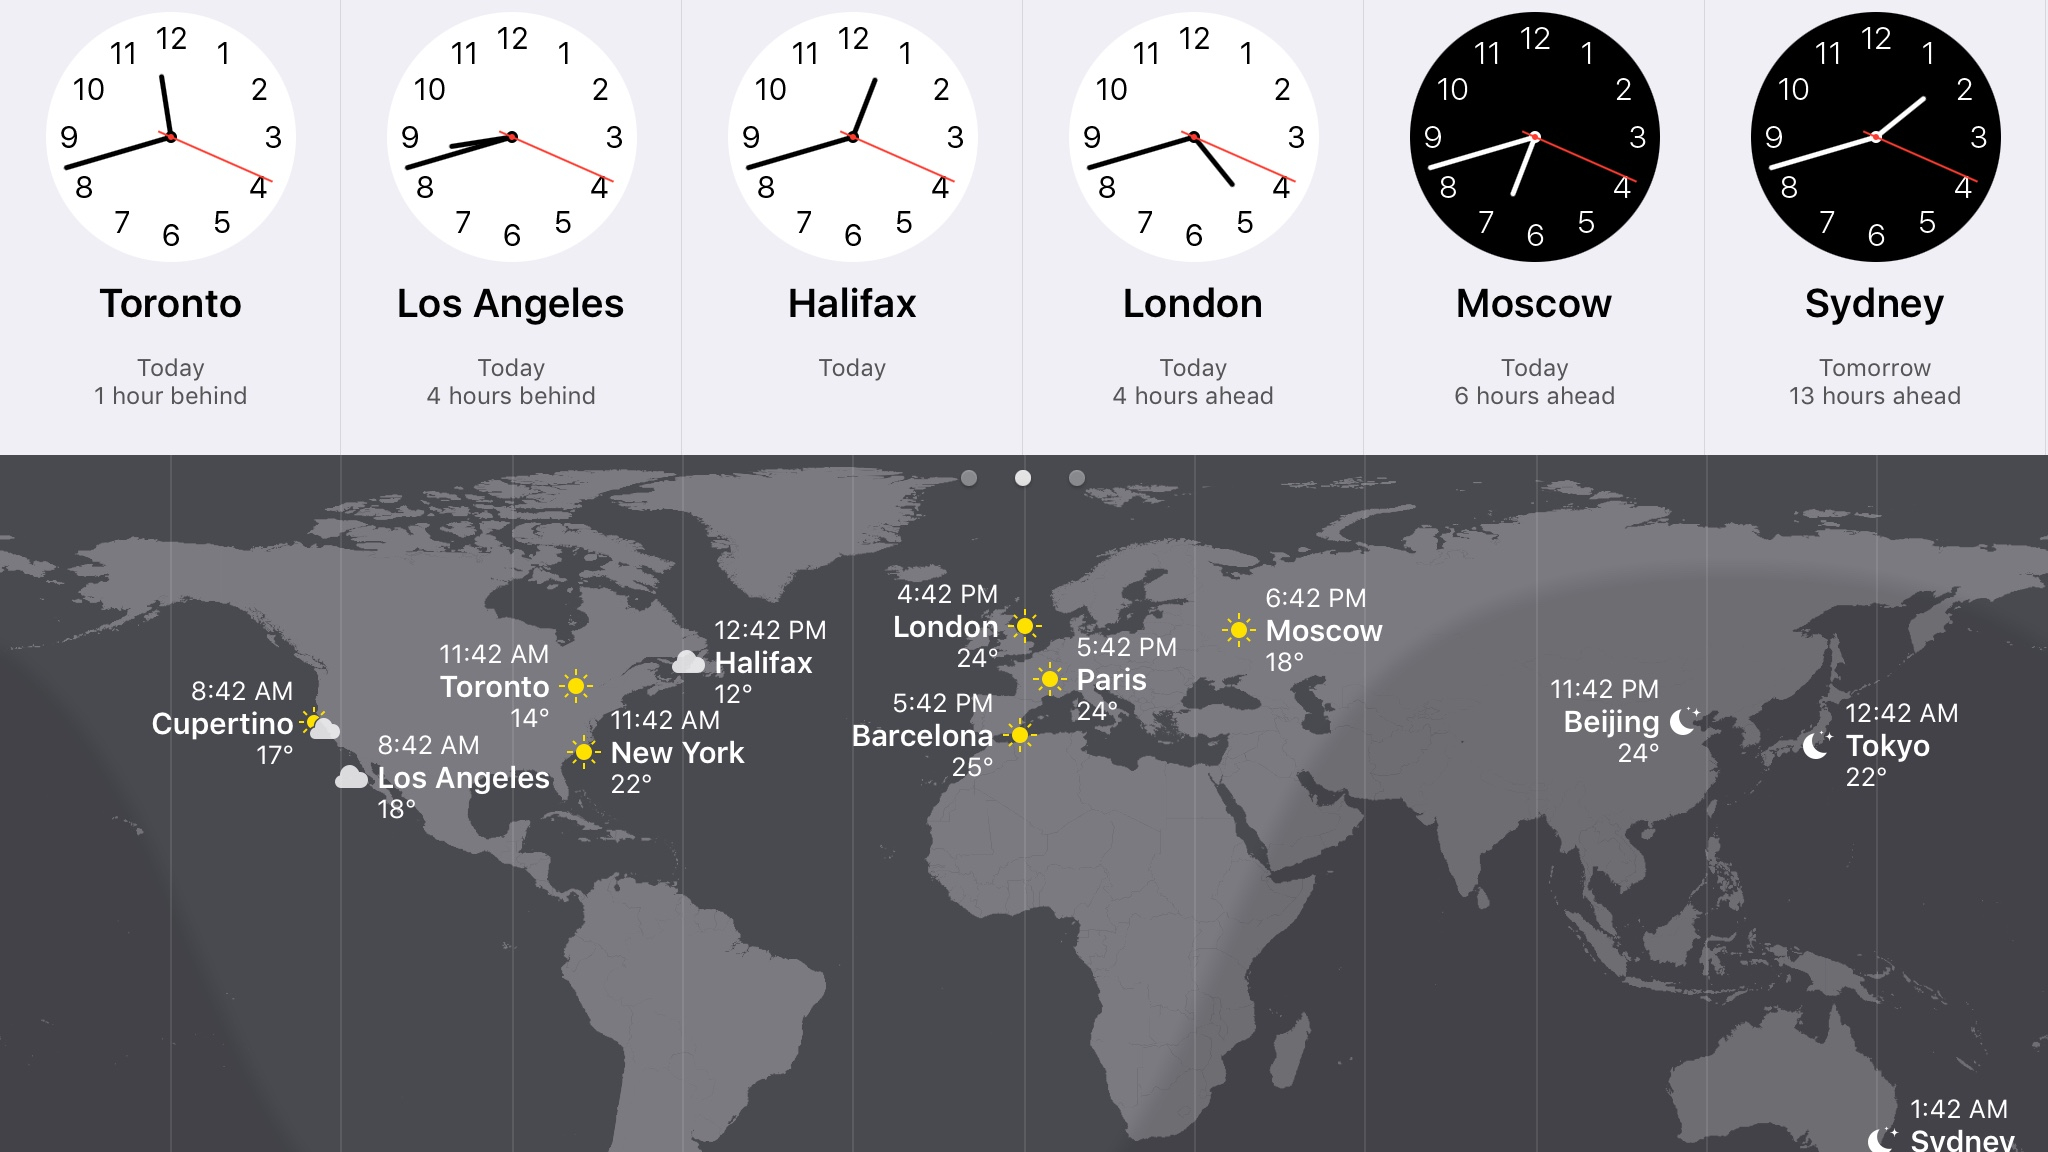 2048x1152 3 Tips for Scheduling Posts Across Multiple Time Zones | AmberMac